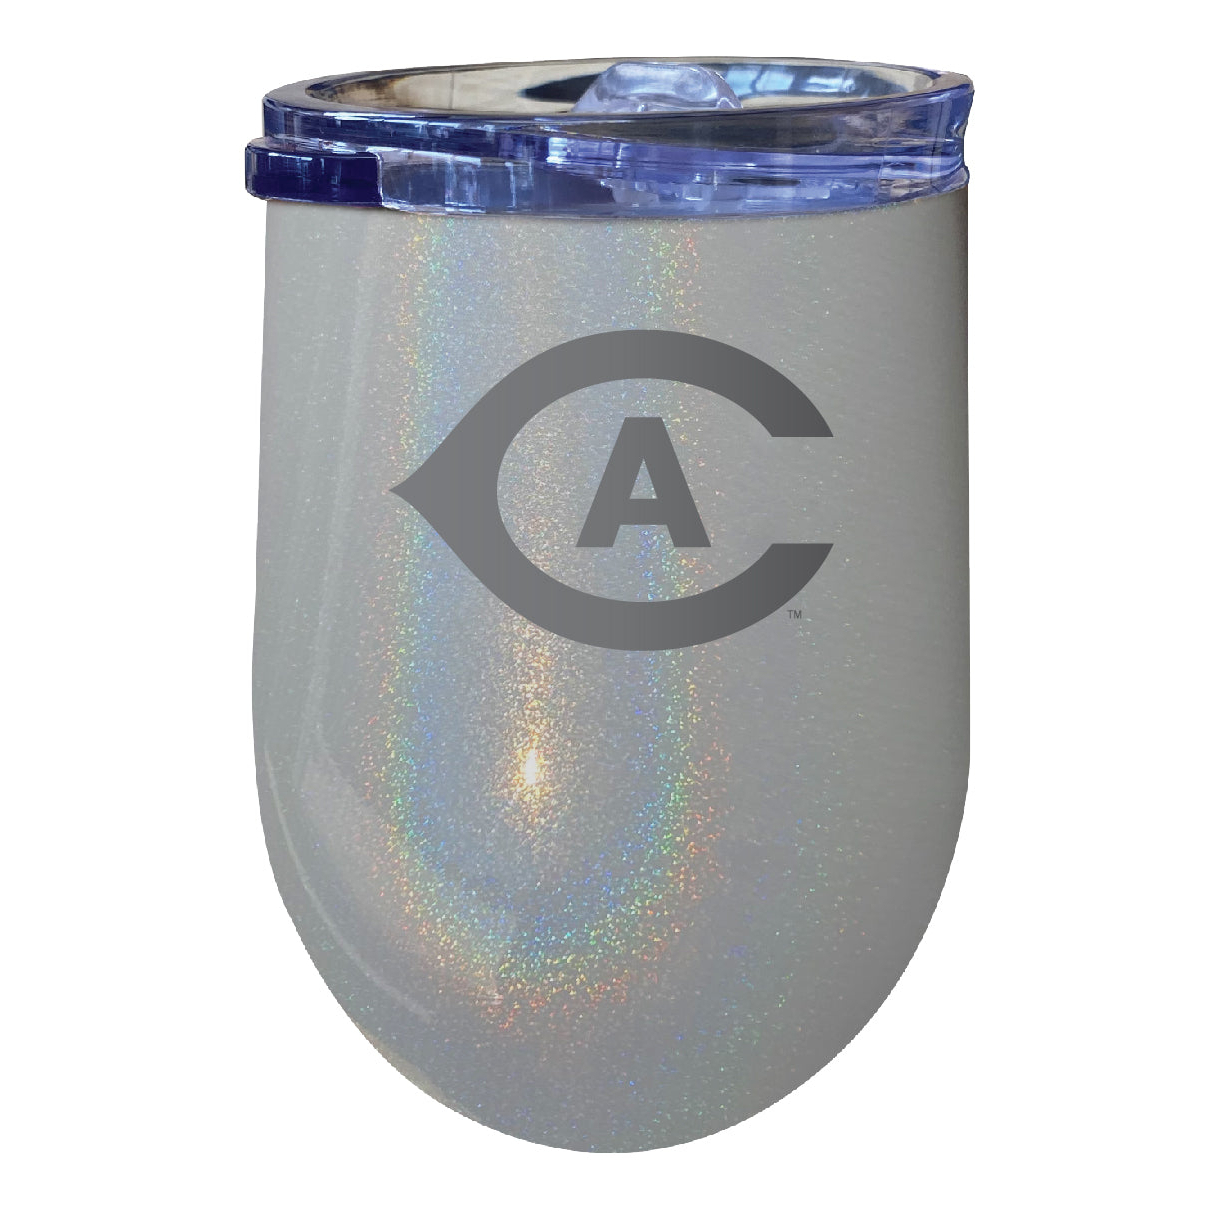 UC Davis Aggies 12 Oz Laser Etched Insulated Wine Stainless Steel Tumbler Rainbow Glitter Grey